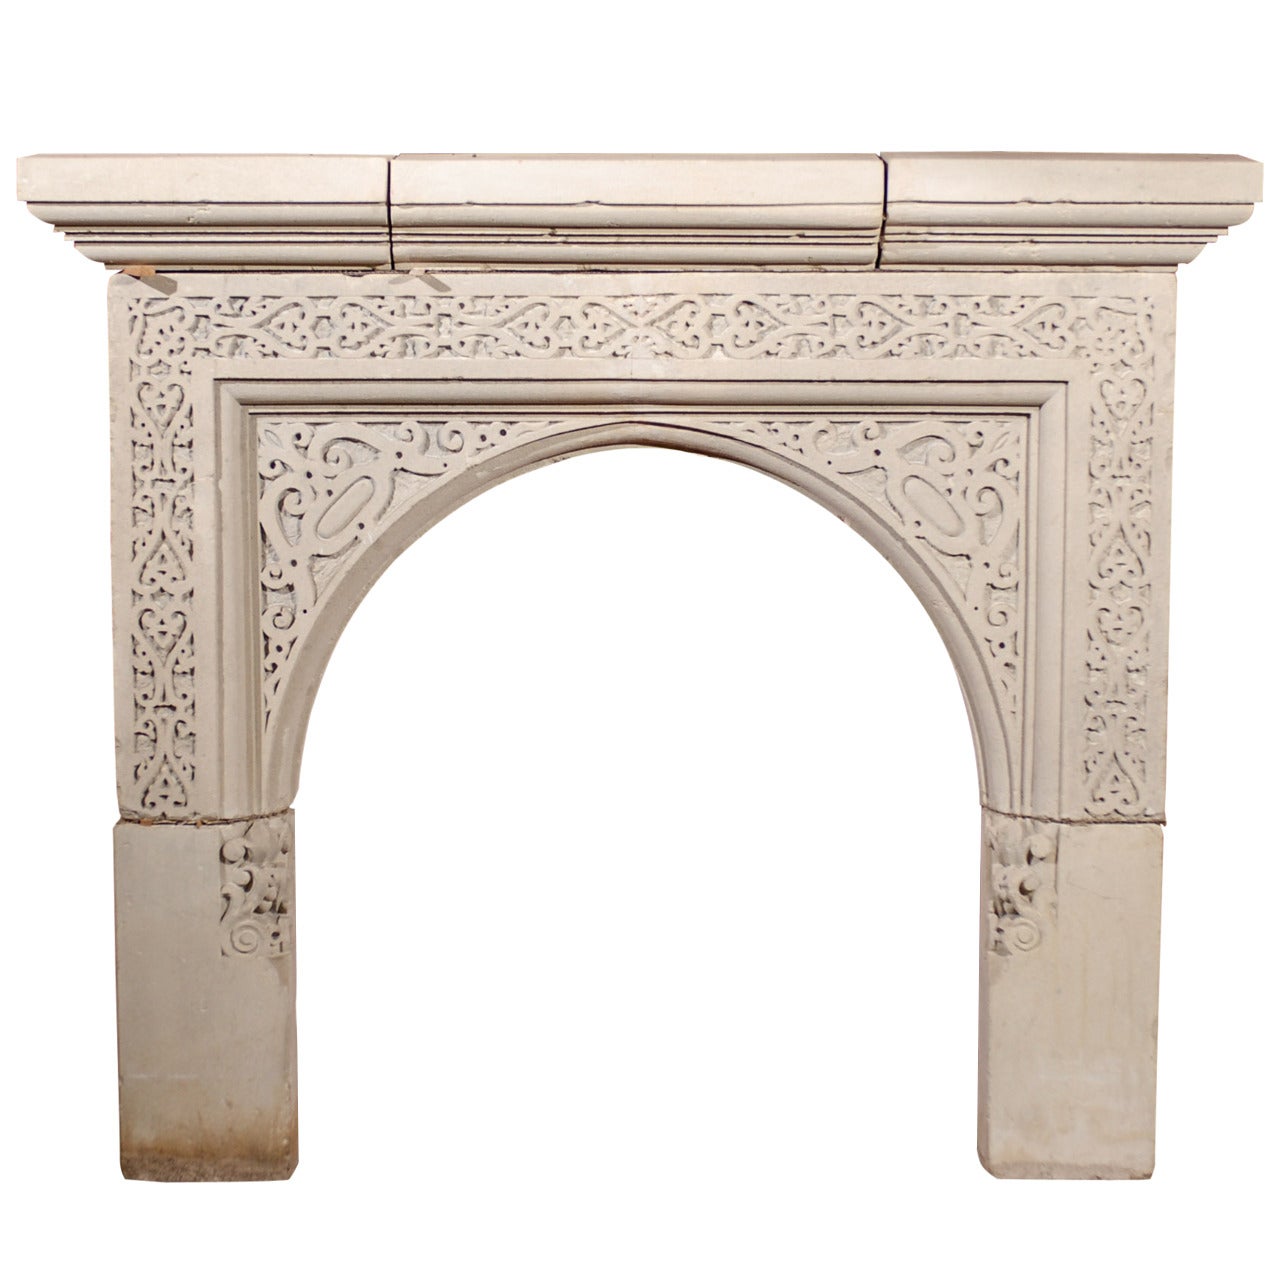 English 19th C. Carved Stone Gothic Revival Mantel For Sale